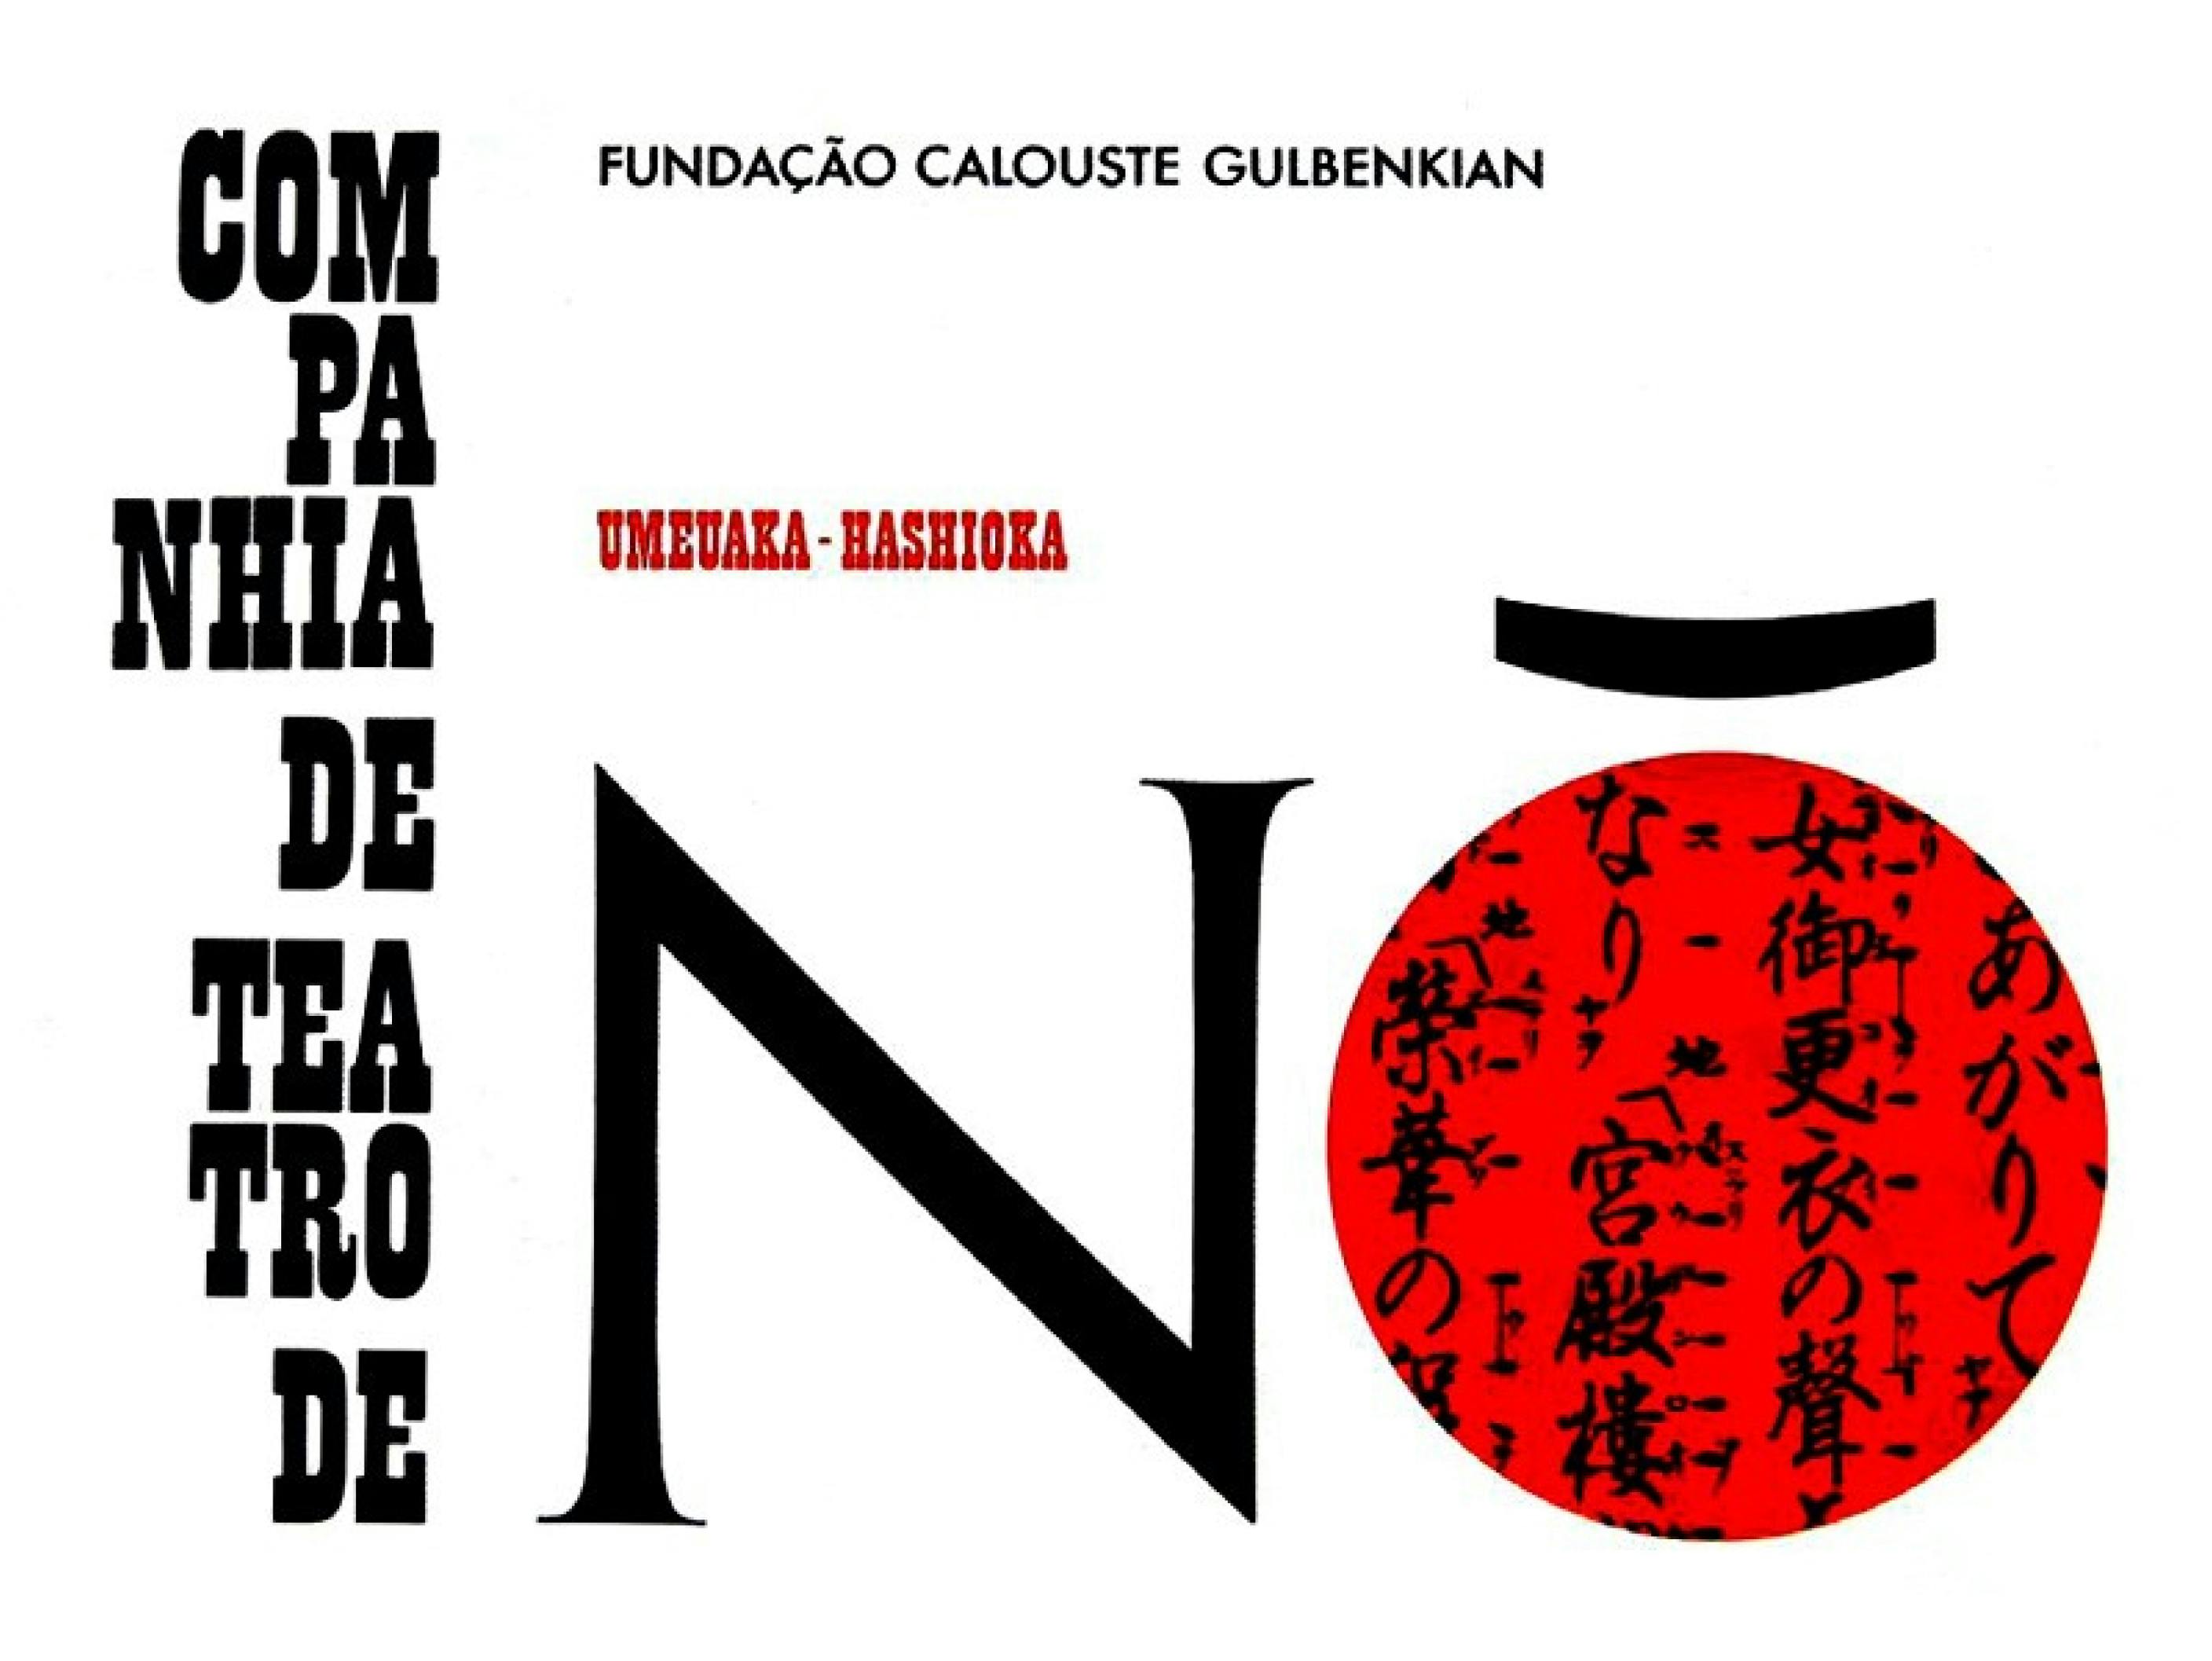 Poster designed by Sebastiao Rodrigues for a theater company that references the Japanese flag aesthetic